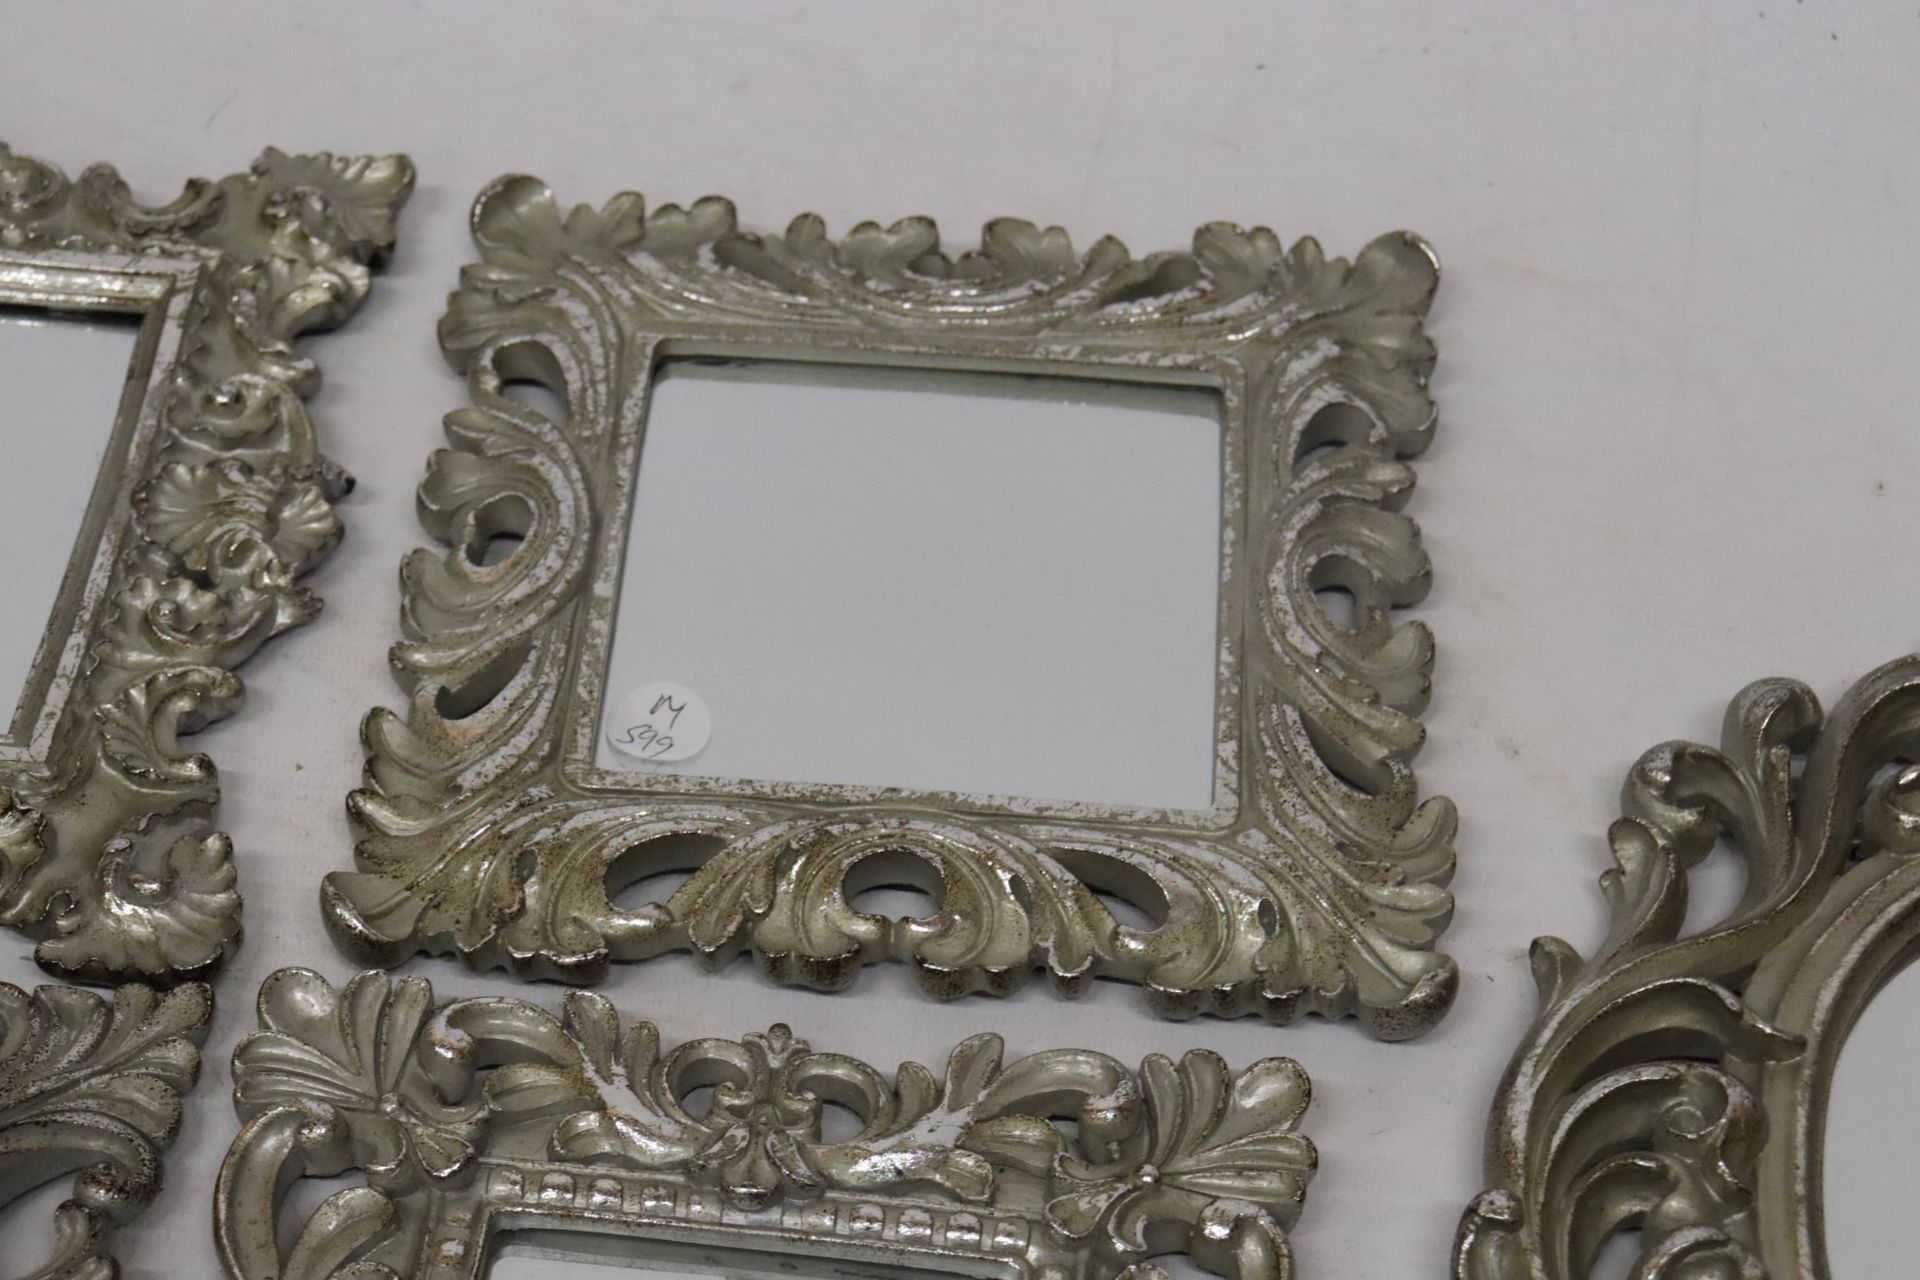 FIVE SMALL MIRRORS WITH ORNATE SILVER COLOURED FRAMES - Image 5 of 9